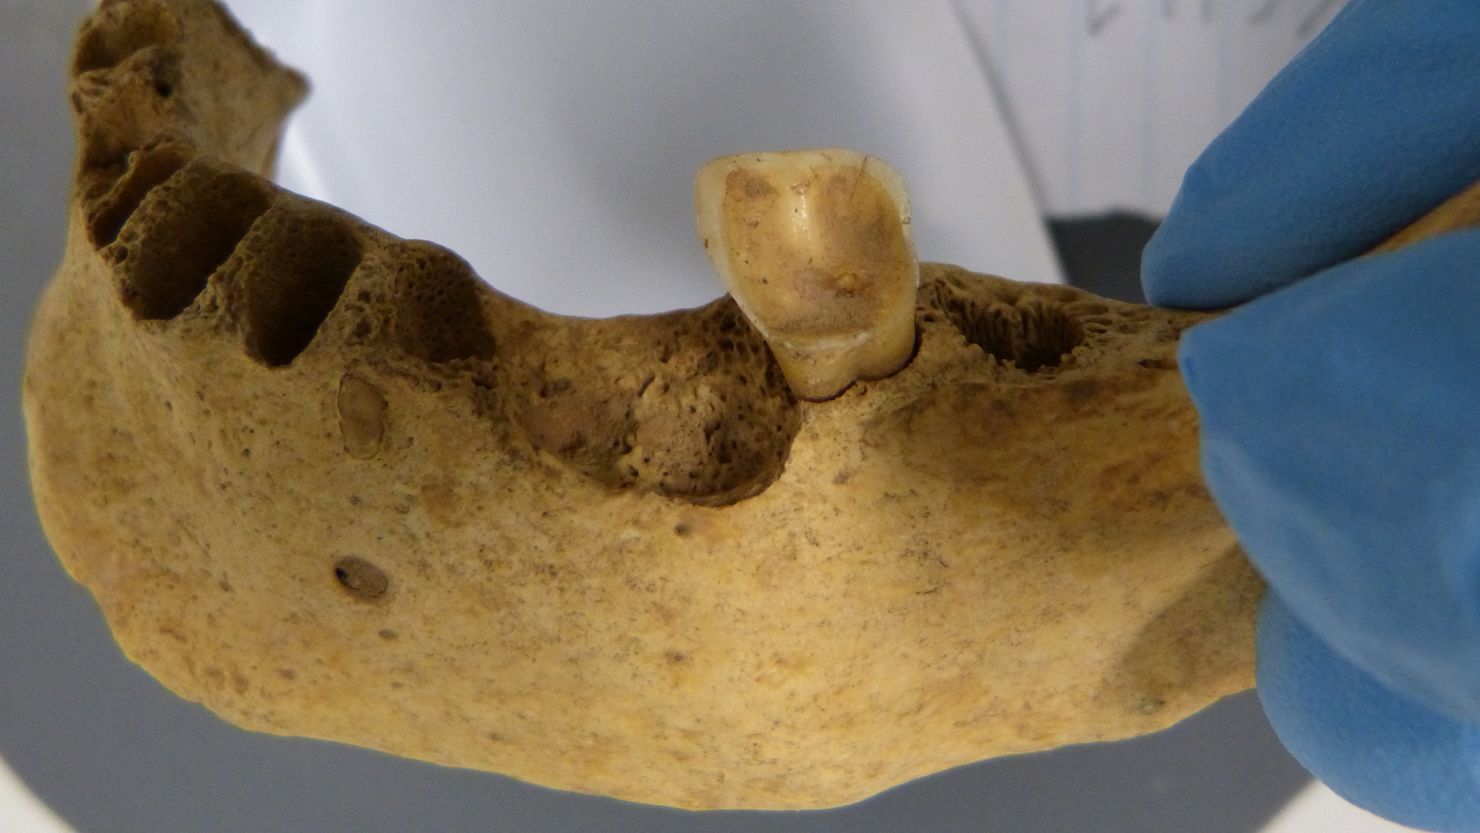 Uncovered in a limestone cave in Ireland, an ancient tooth from 4,000 years ago was found to have an abundance of a cavity-causing bacteria that is rare in the ancient genomic record.